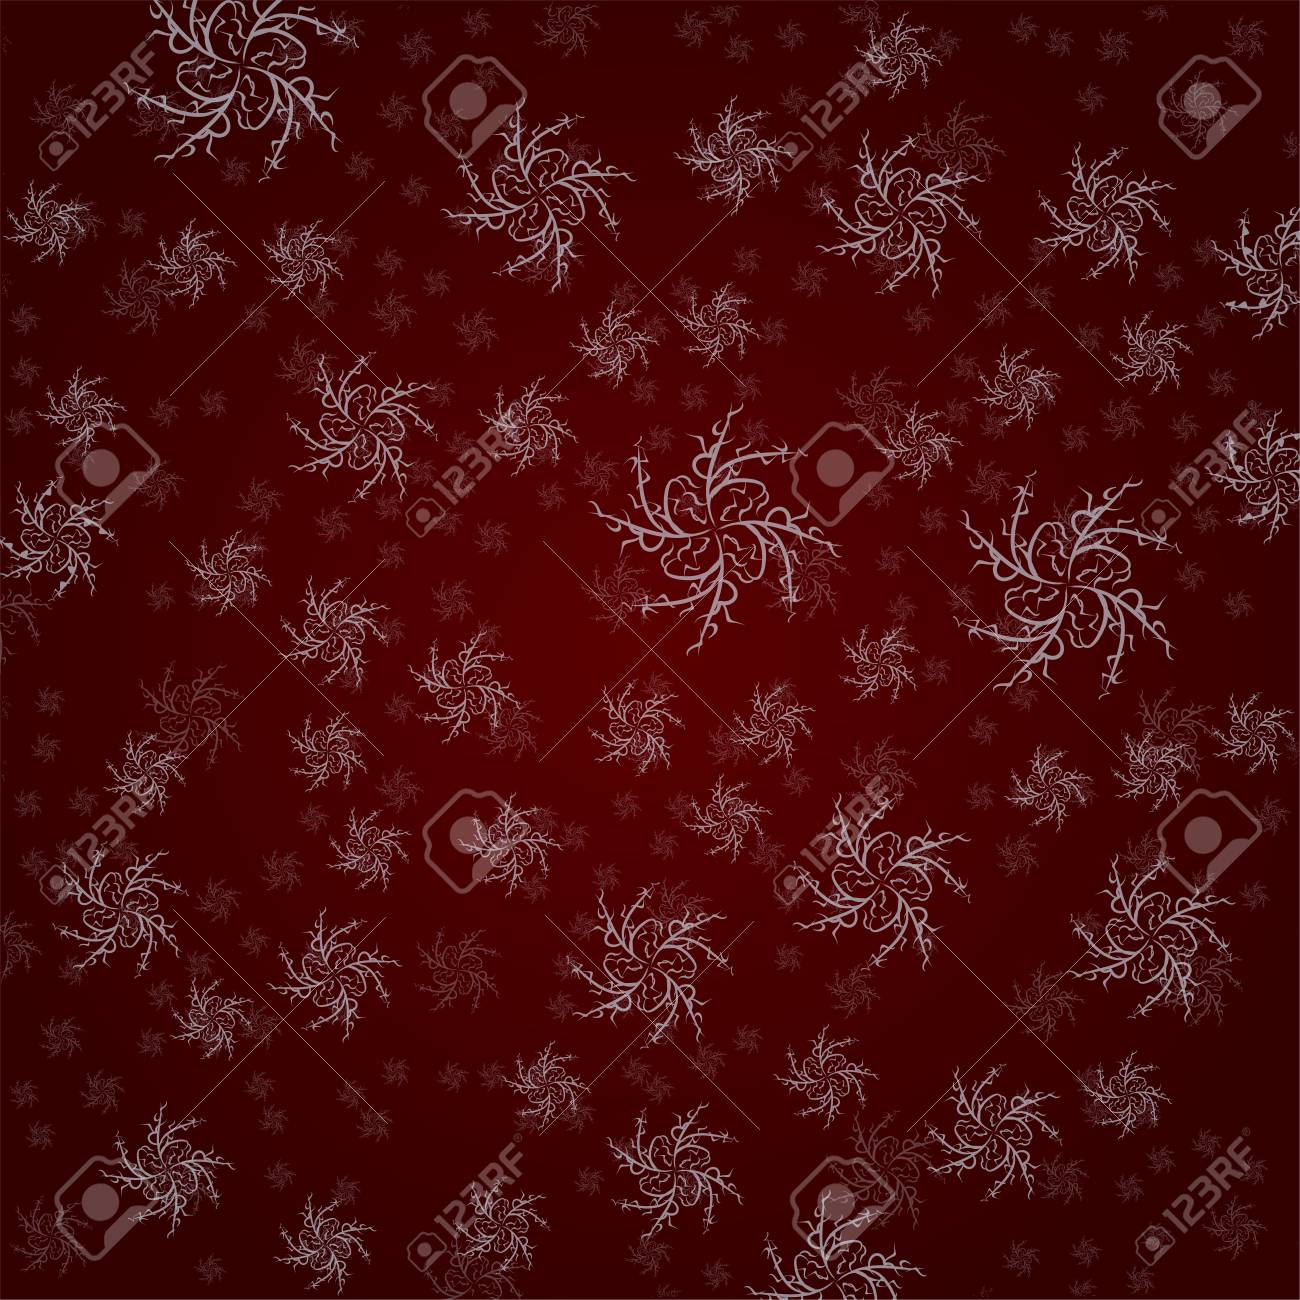 Snowflakes Pattern On A Burgundy Background Beautiful Christmas